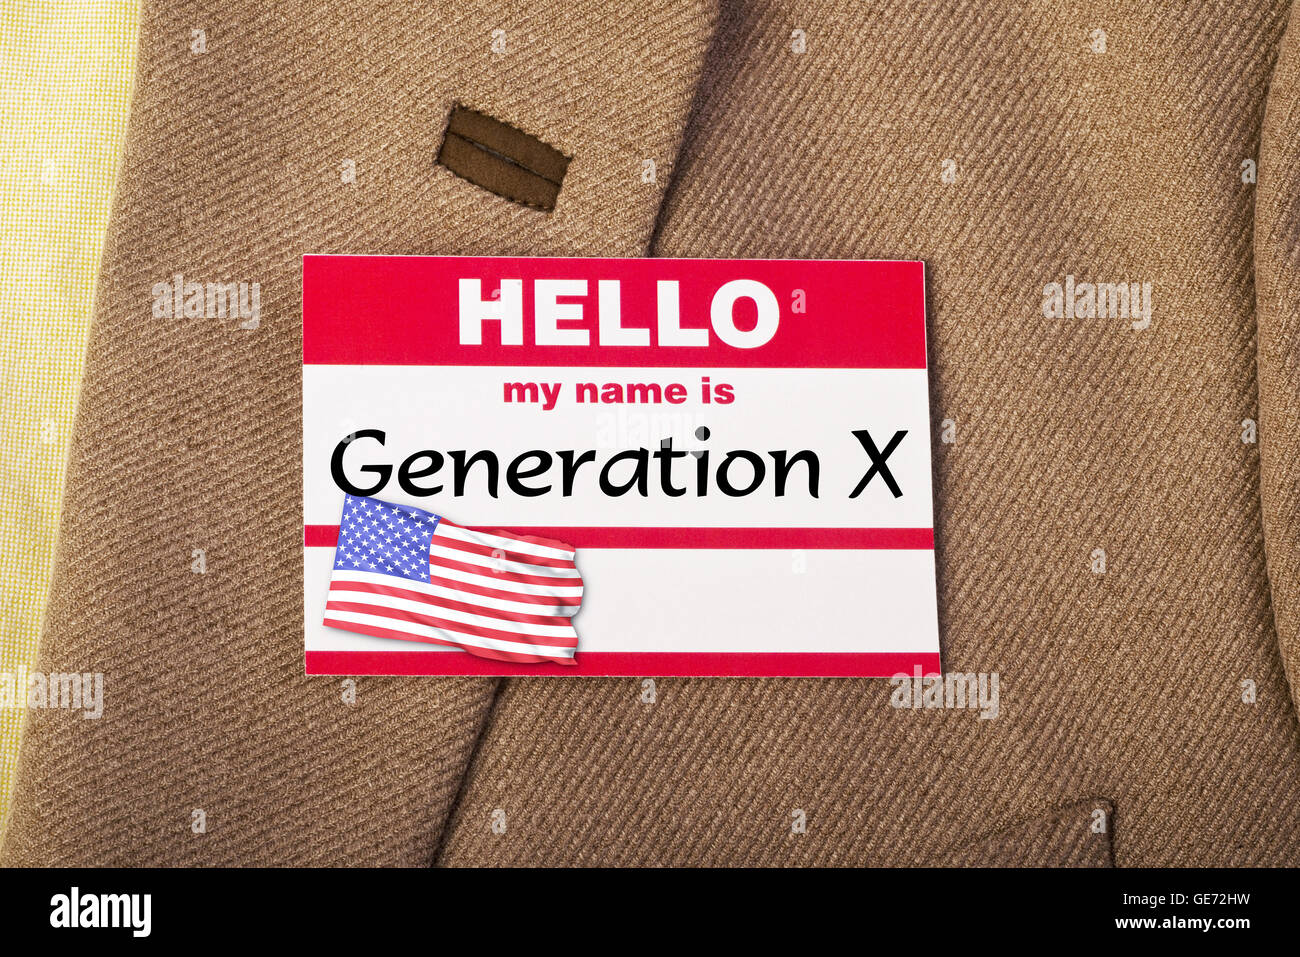 My name is Generation X. Stock Photo